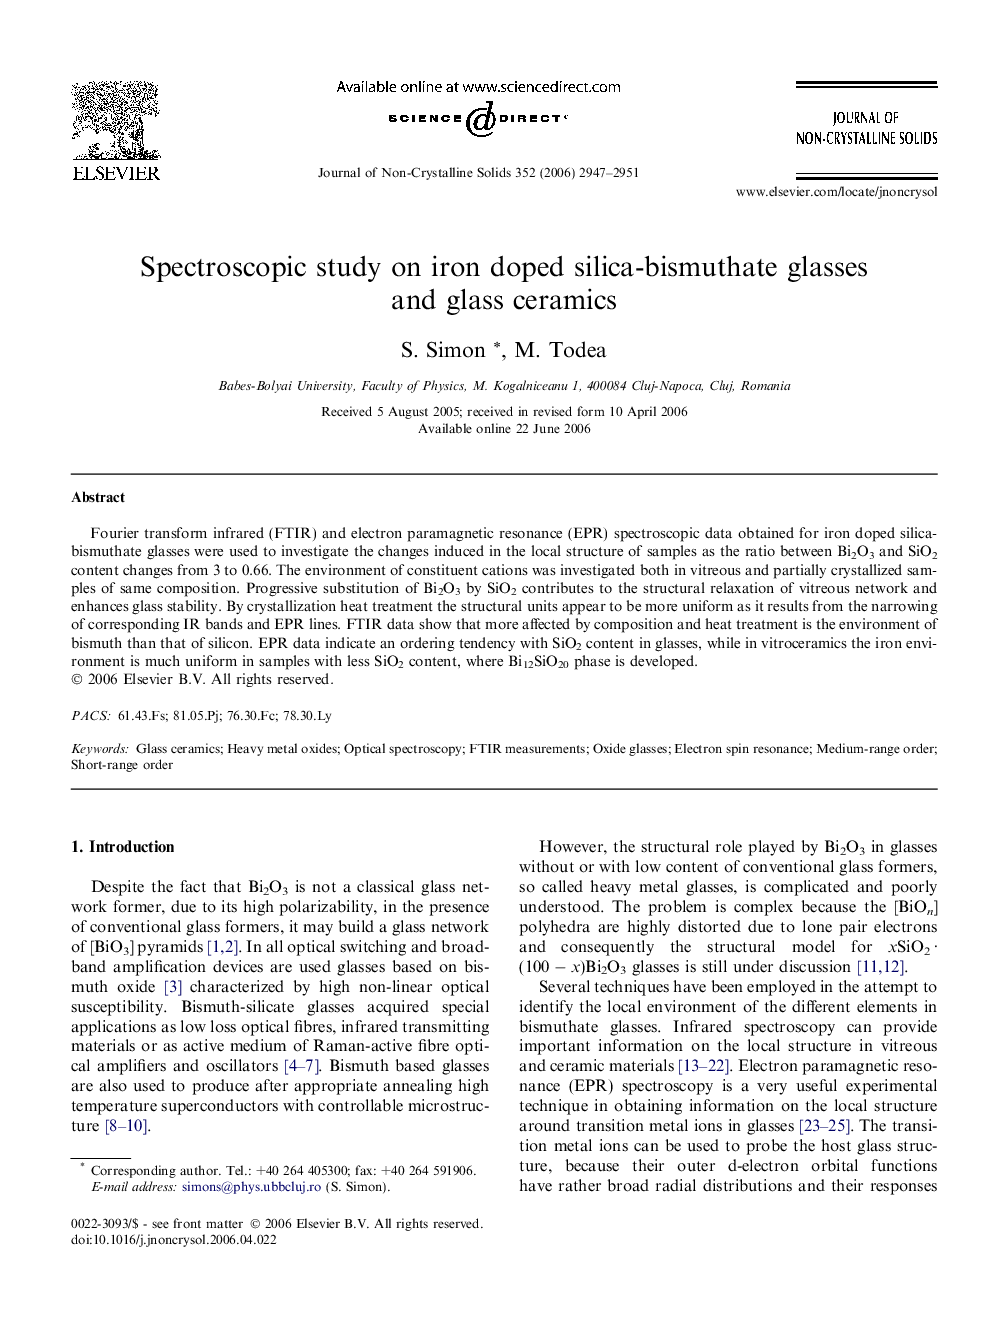 Spectroscopic study on iron doped silica-bismuthate glasses and glass ceramics